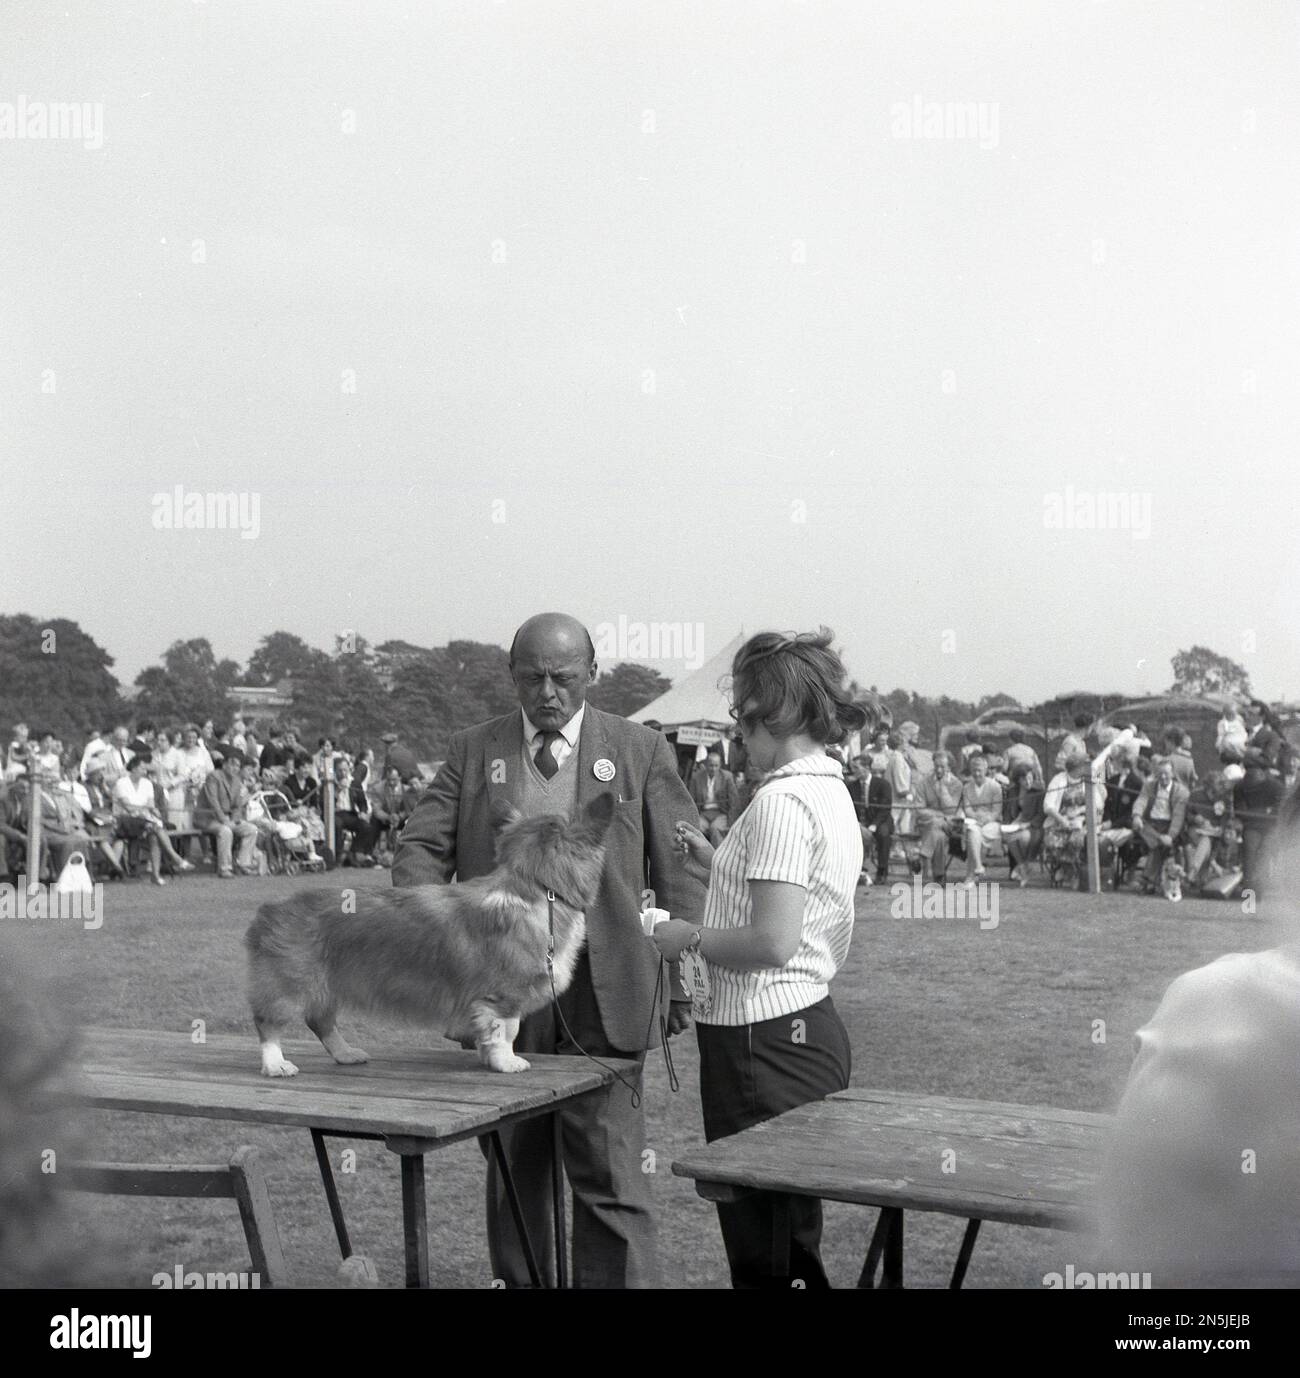 1963, historical, outside in a field, a judge looking at a small dog standing on a tressel table beside it's young female owner, England, UK. Stock Photo